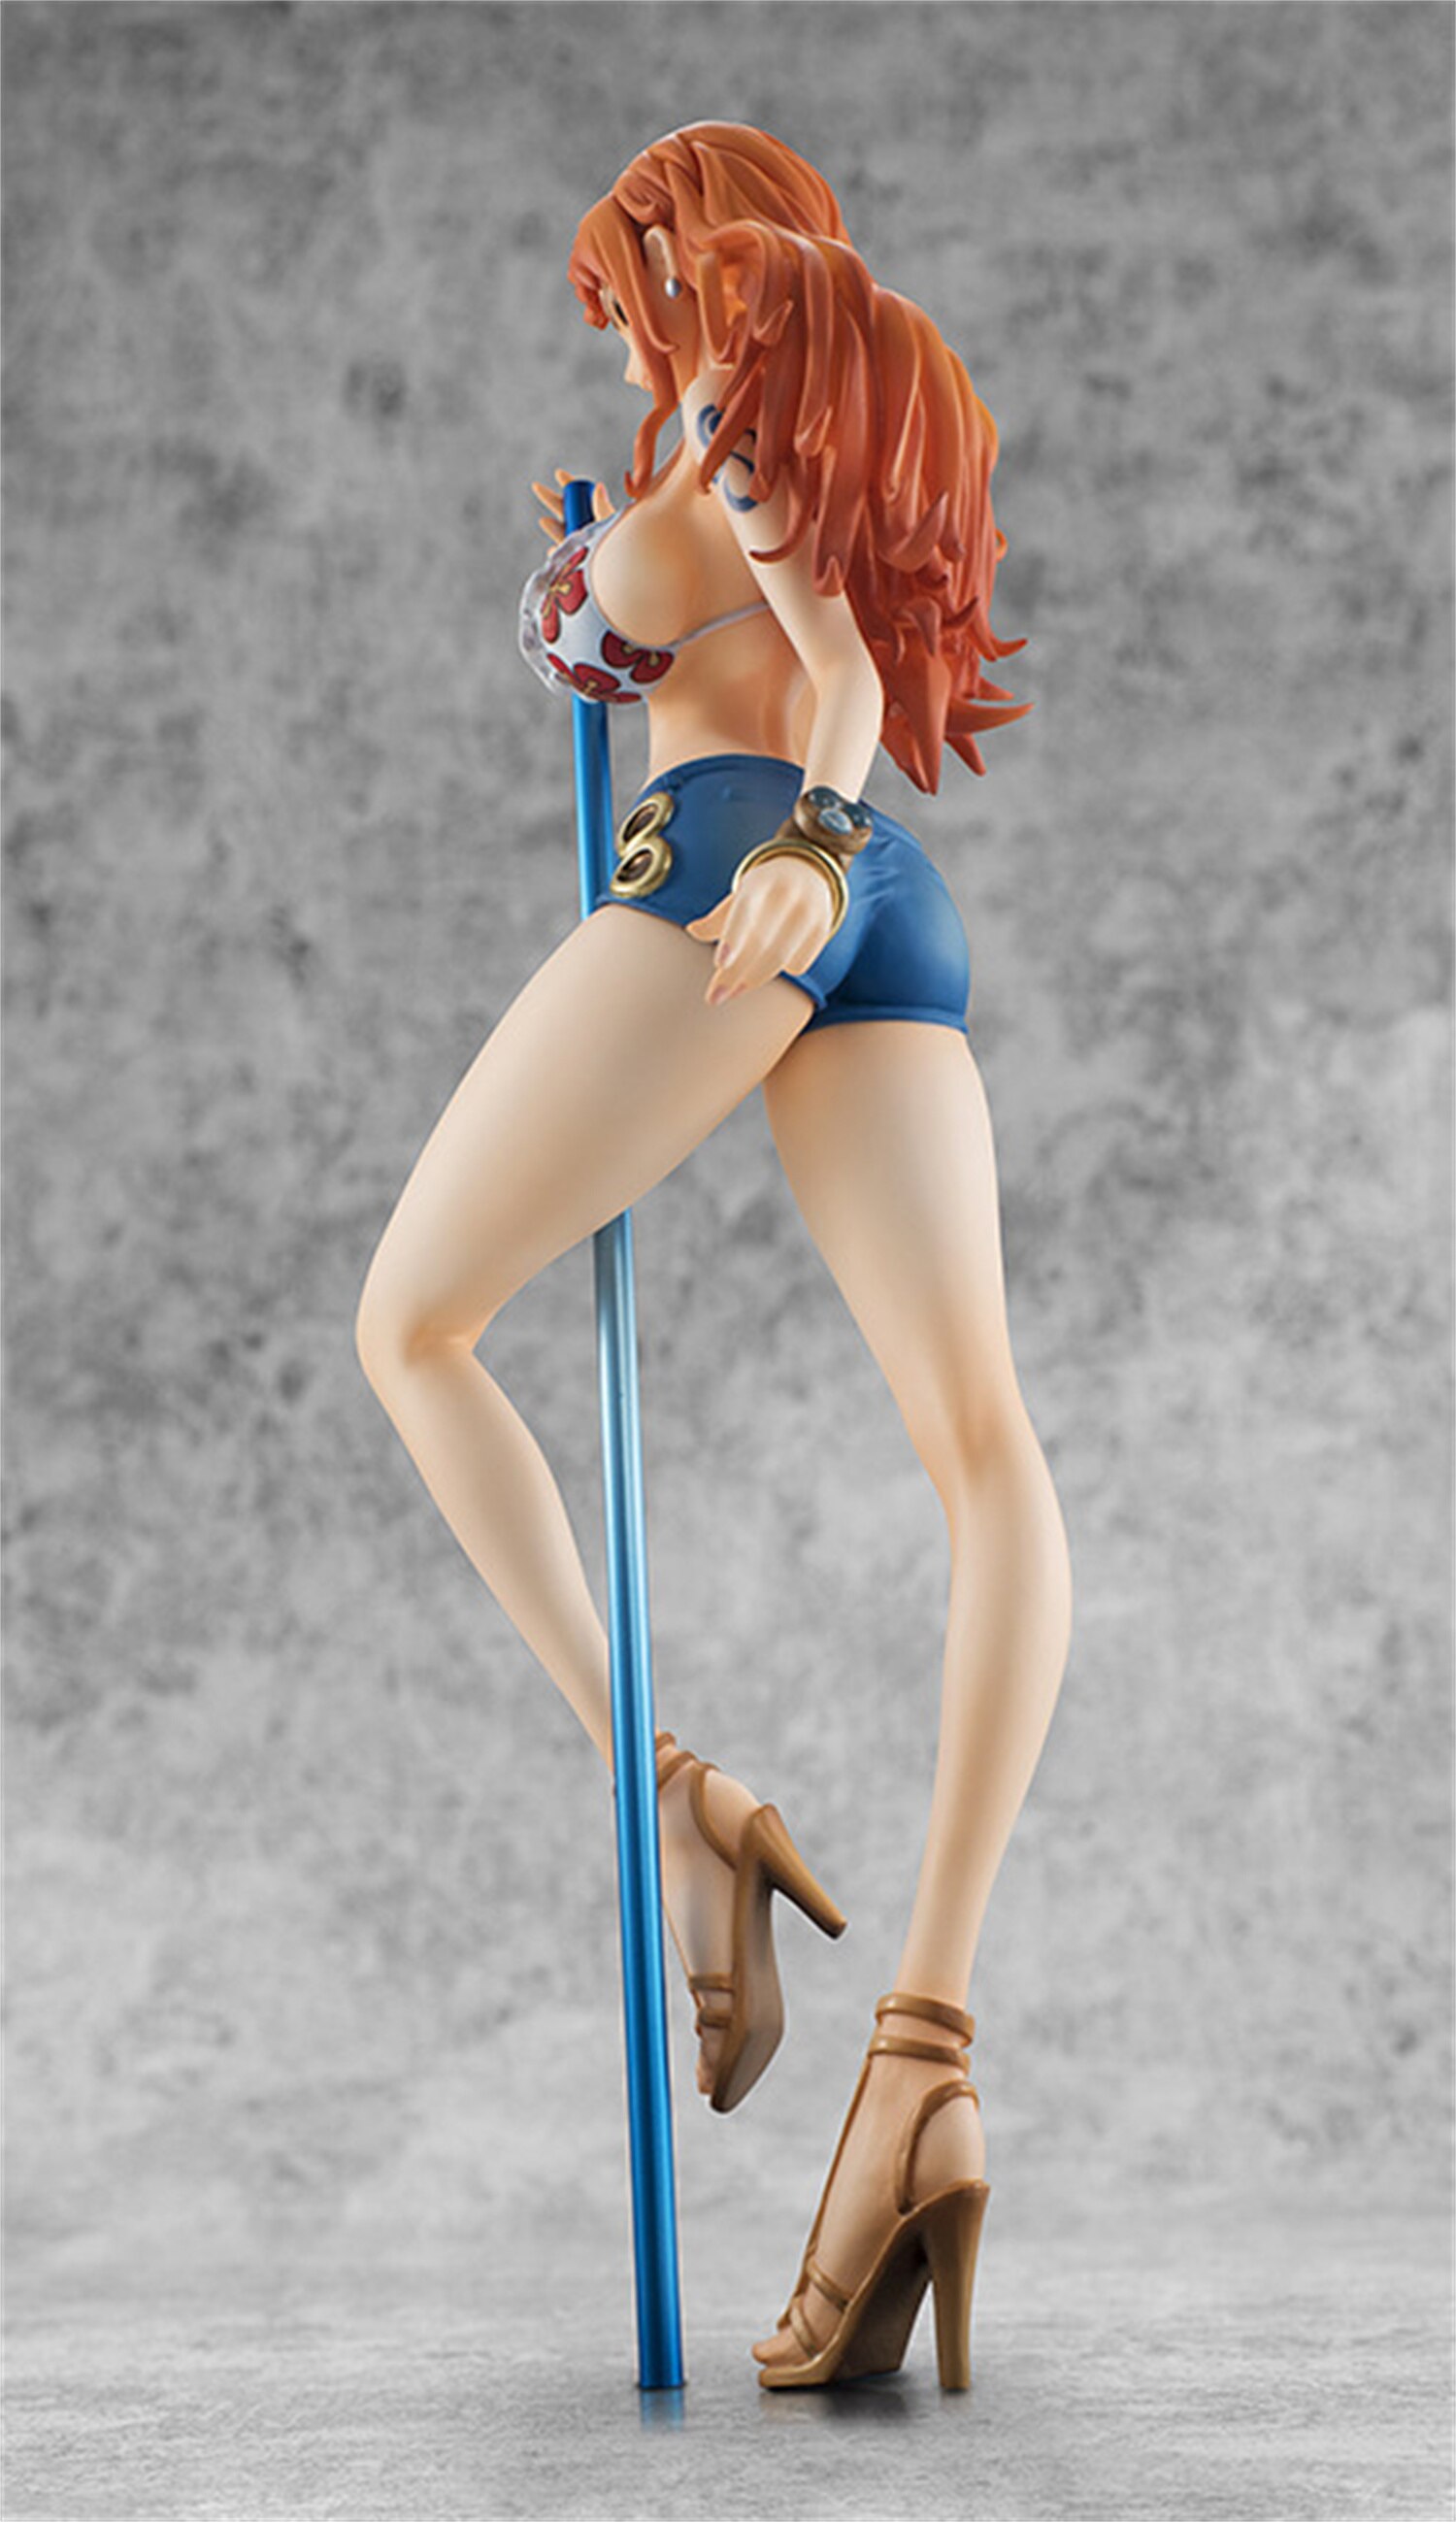 One Piece Anime Figure Nami Song Dance BB Pole Dance Swimsuit Sexy Figurine PVC Action Figure 5 - One Piece Store